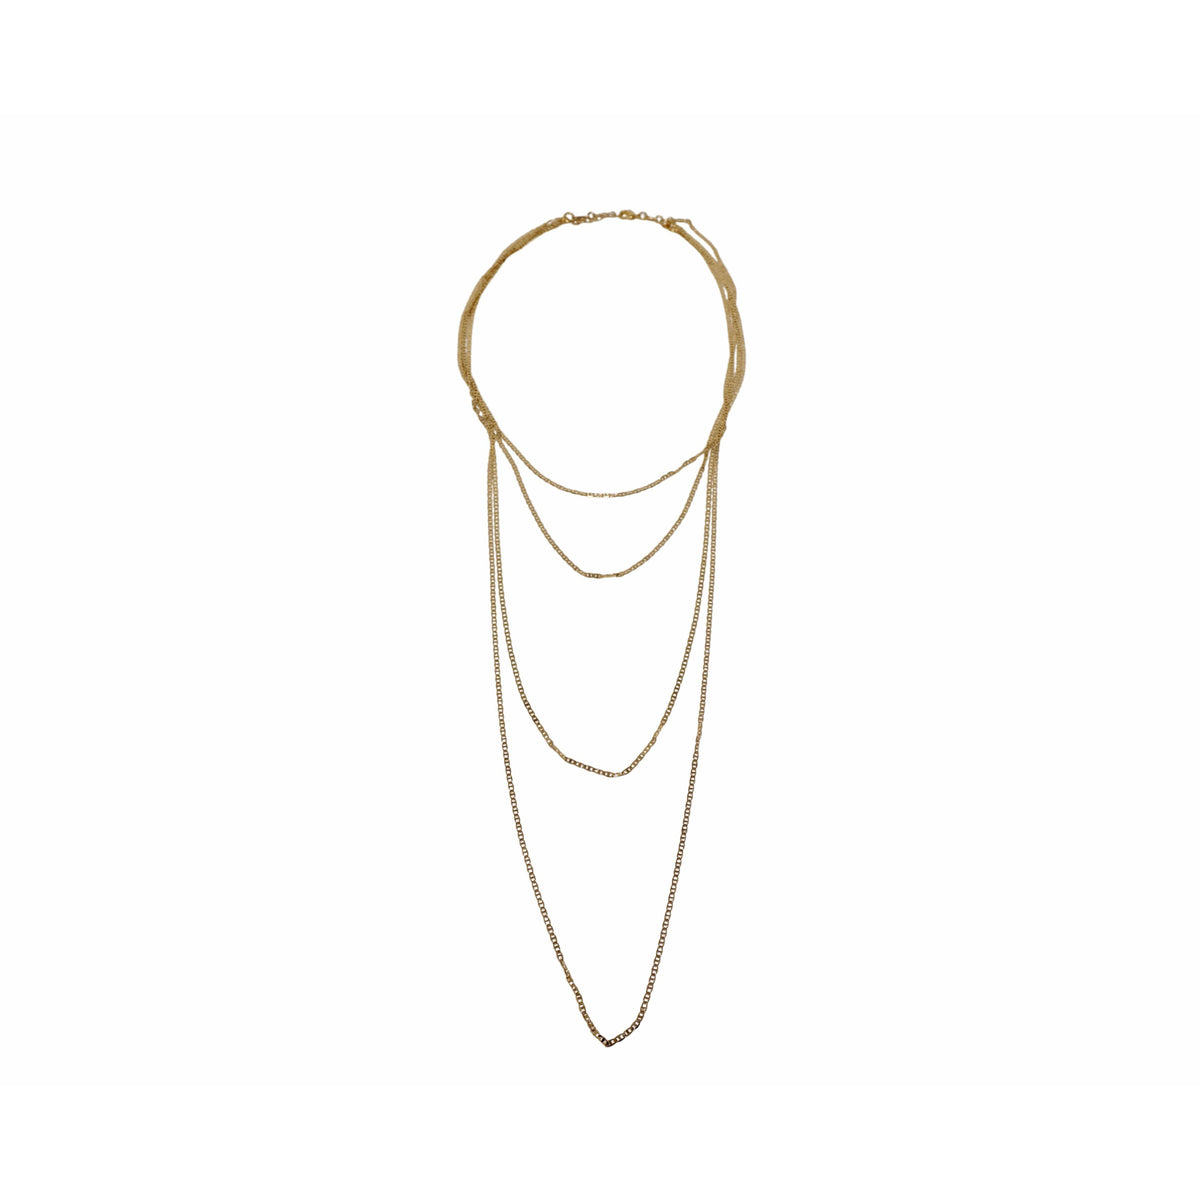 Golden Layer Necklace